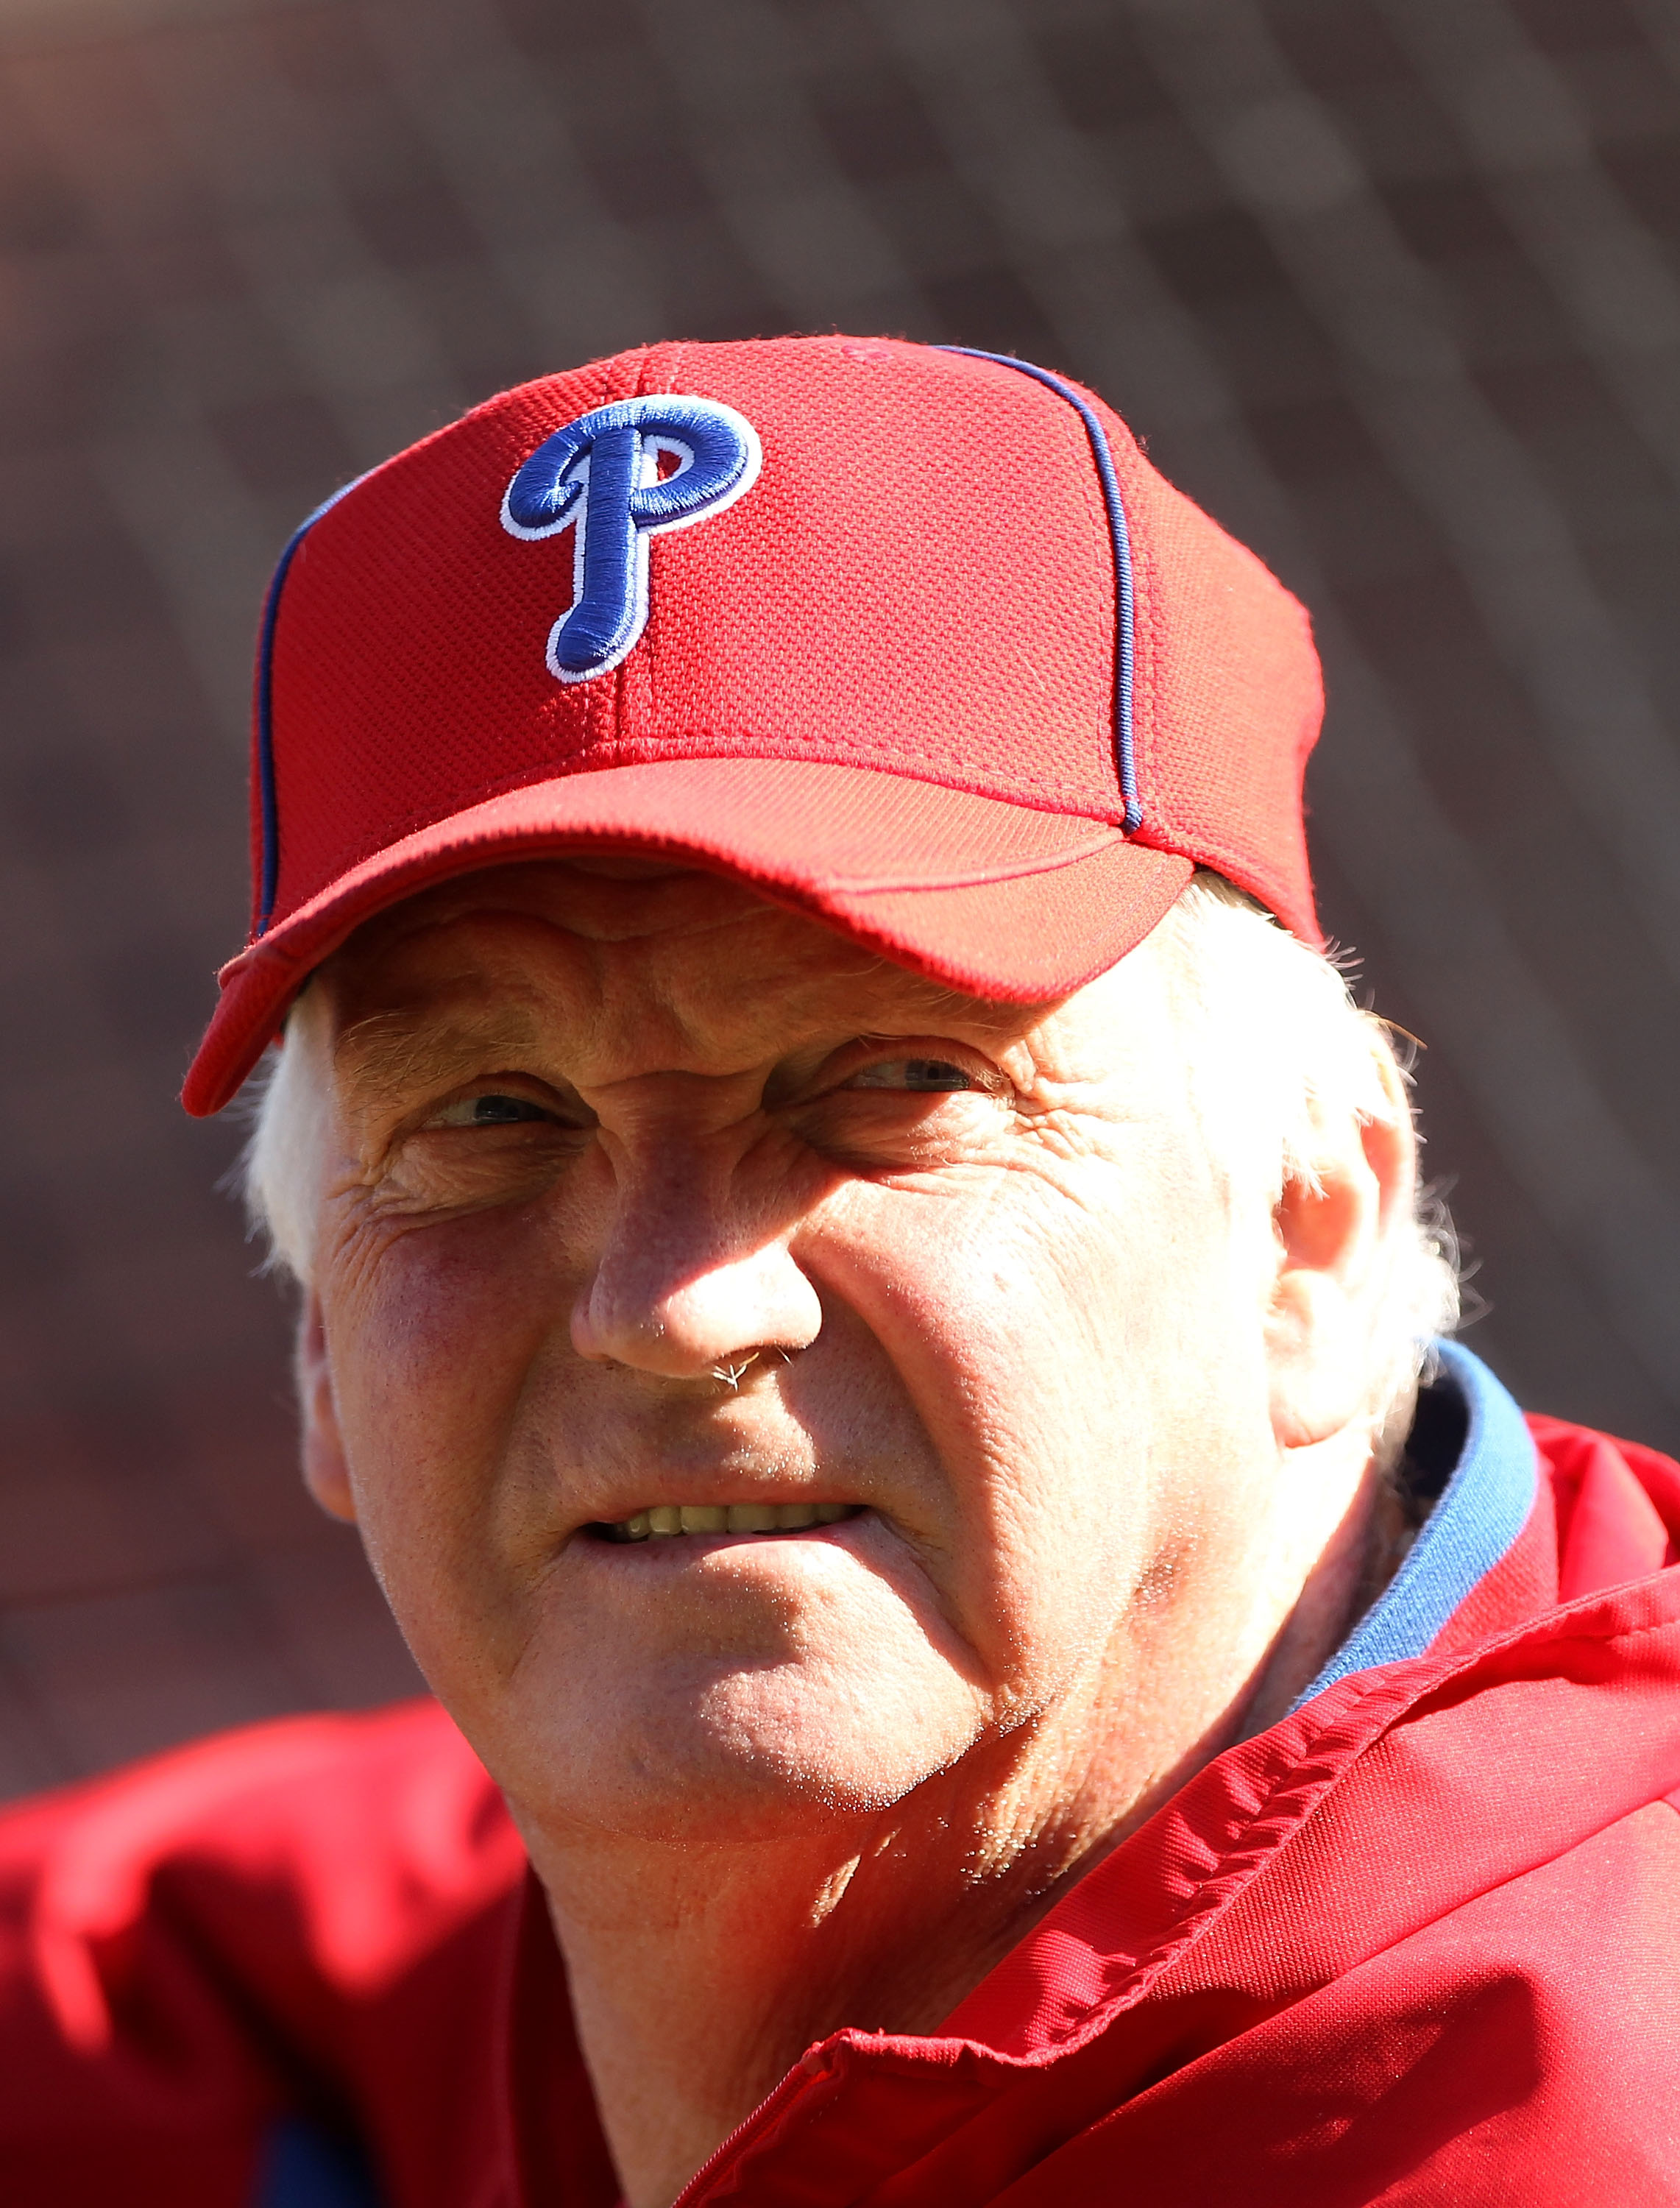 SAN FRANCISCO - OCTOBER 18:  Manager Charlie Manuel of the Philadephia Philles watches his team take batting practice during a workout session for the NLCS at AT&T Park on October 18, 2010 in San Francisco, California.  (Photo by Ezra Shaw/Getty Images)